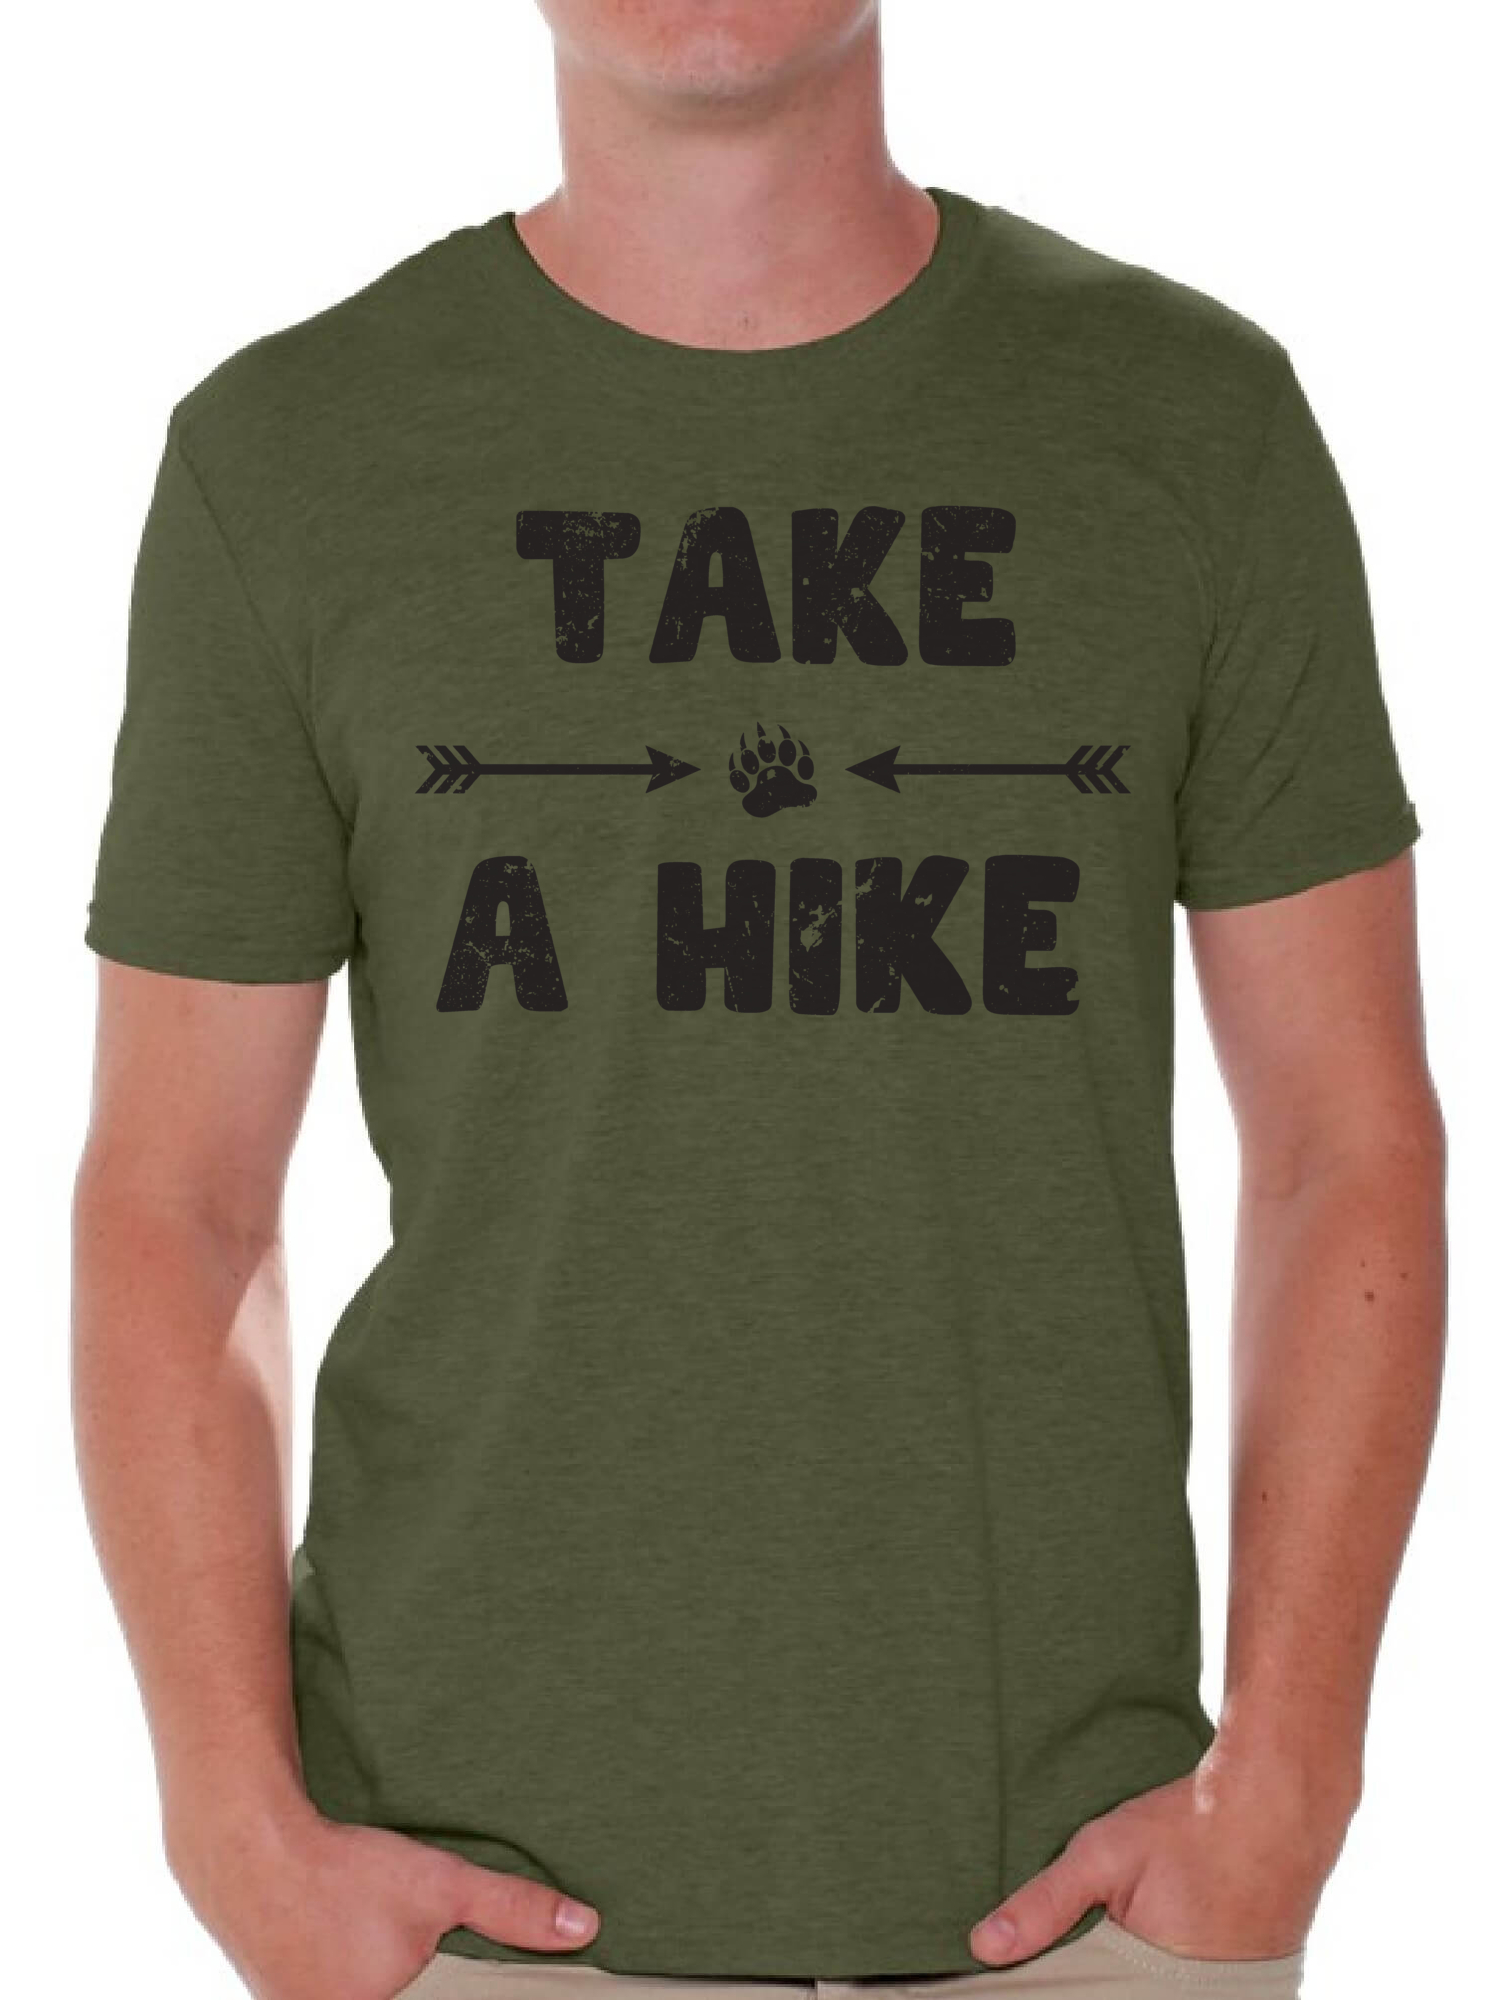 Awkward Styles Hiking Lovers Clothes Hike Outfit Take a Hike T Shirts for Men Men Shirts Outdoor Clothing for Men Cute Gifts for Husband Men's Outfit Take a Hike T-shirts Hiking Shirt for Him - image 1 of 4